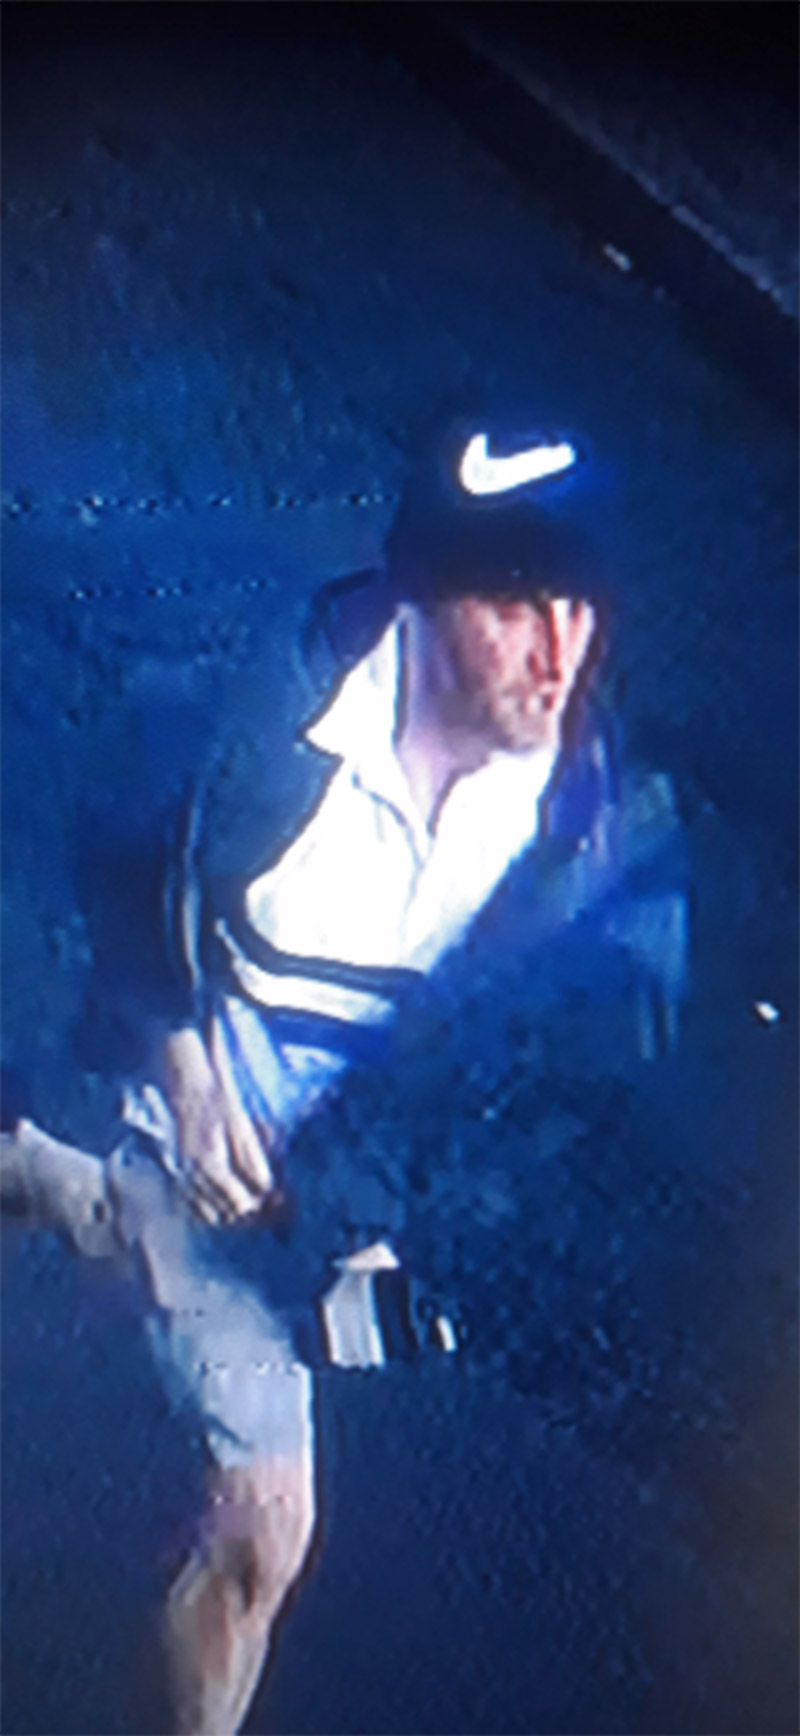 Main image for CCTV released following burglary